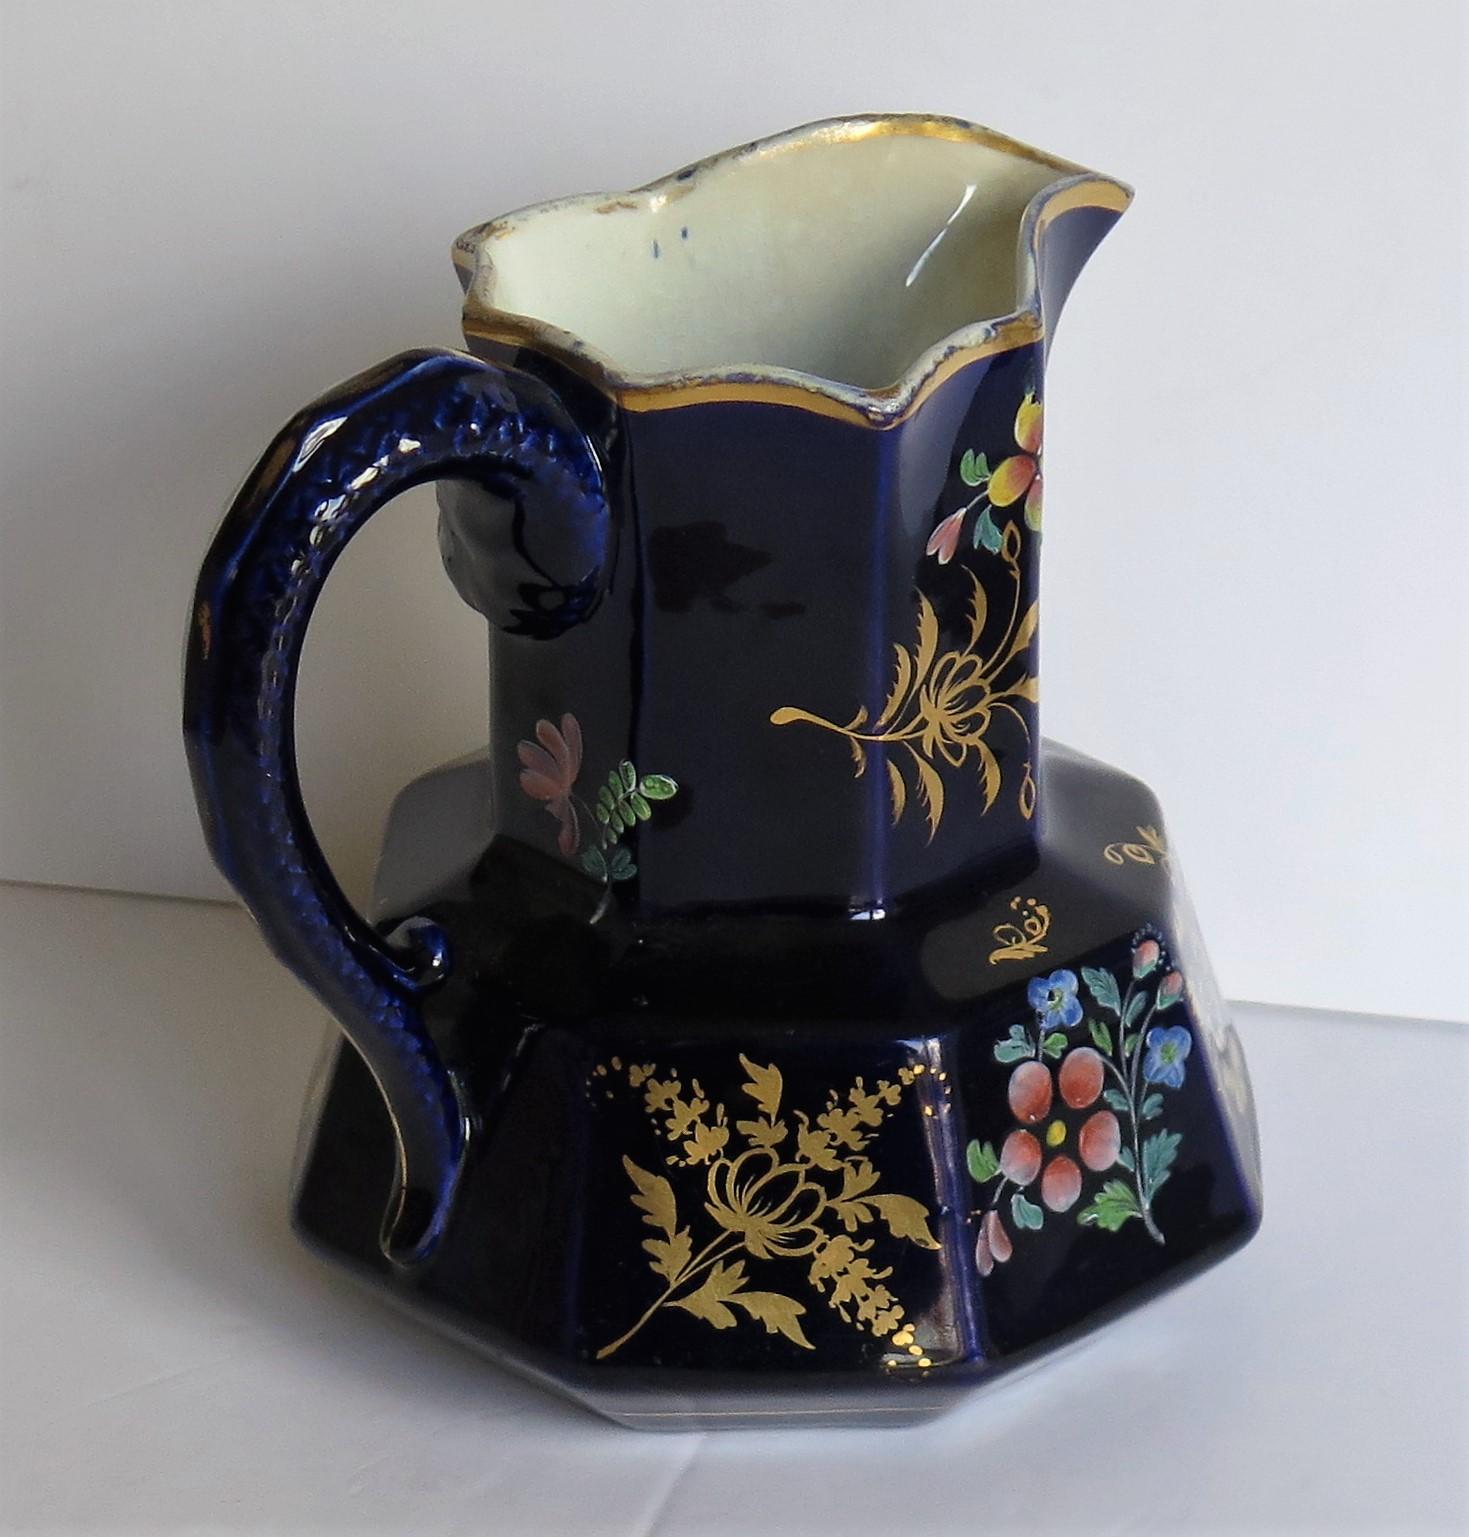 Rare Early 19th Century Ironstone Jug or Pitcher, Zachariah Boyle Hand Enamelled 5